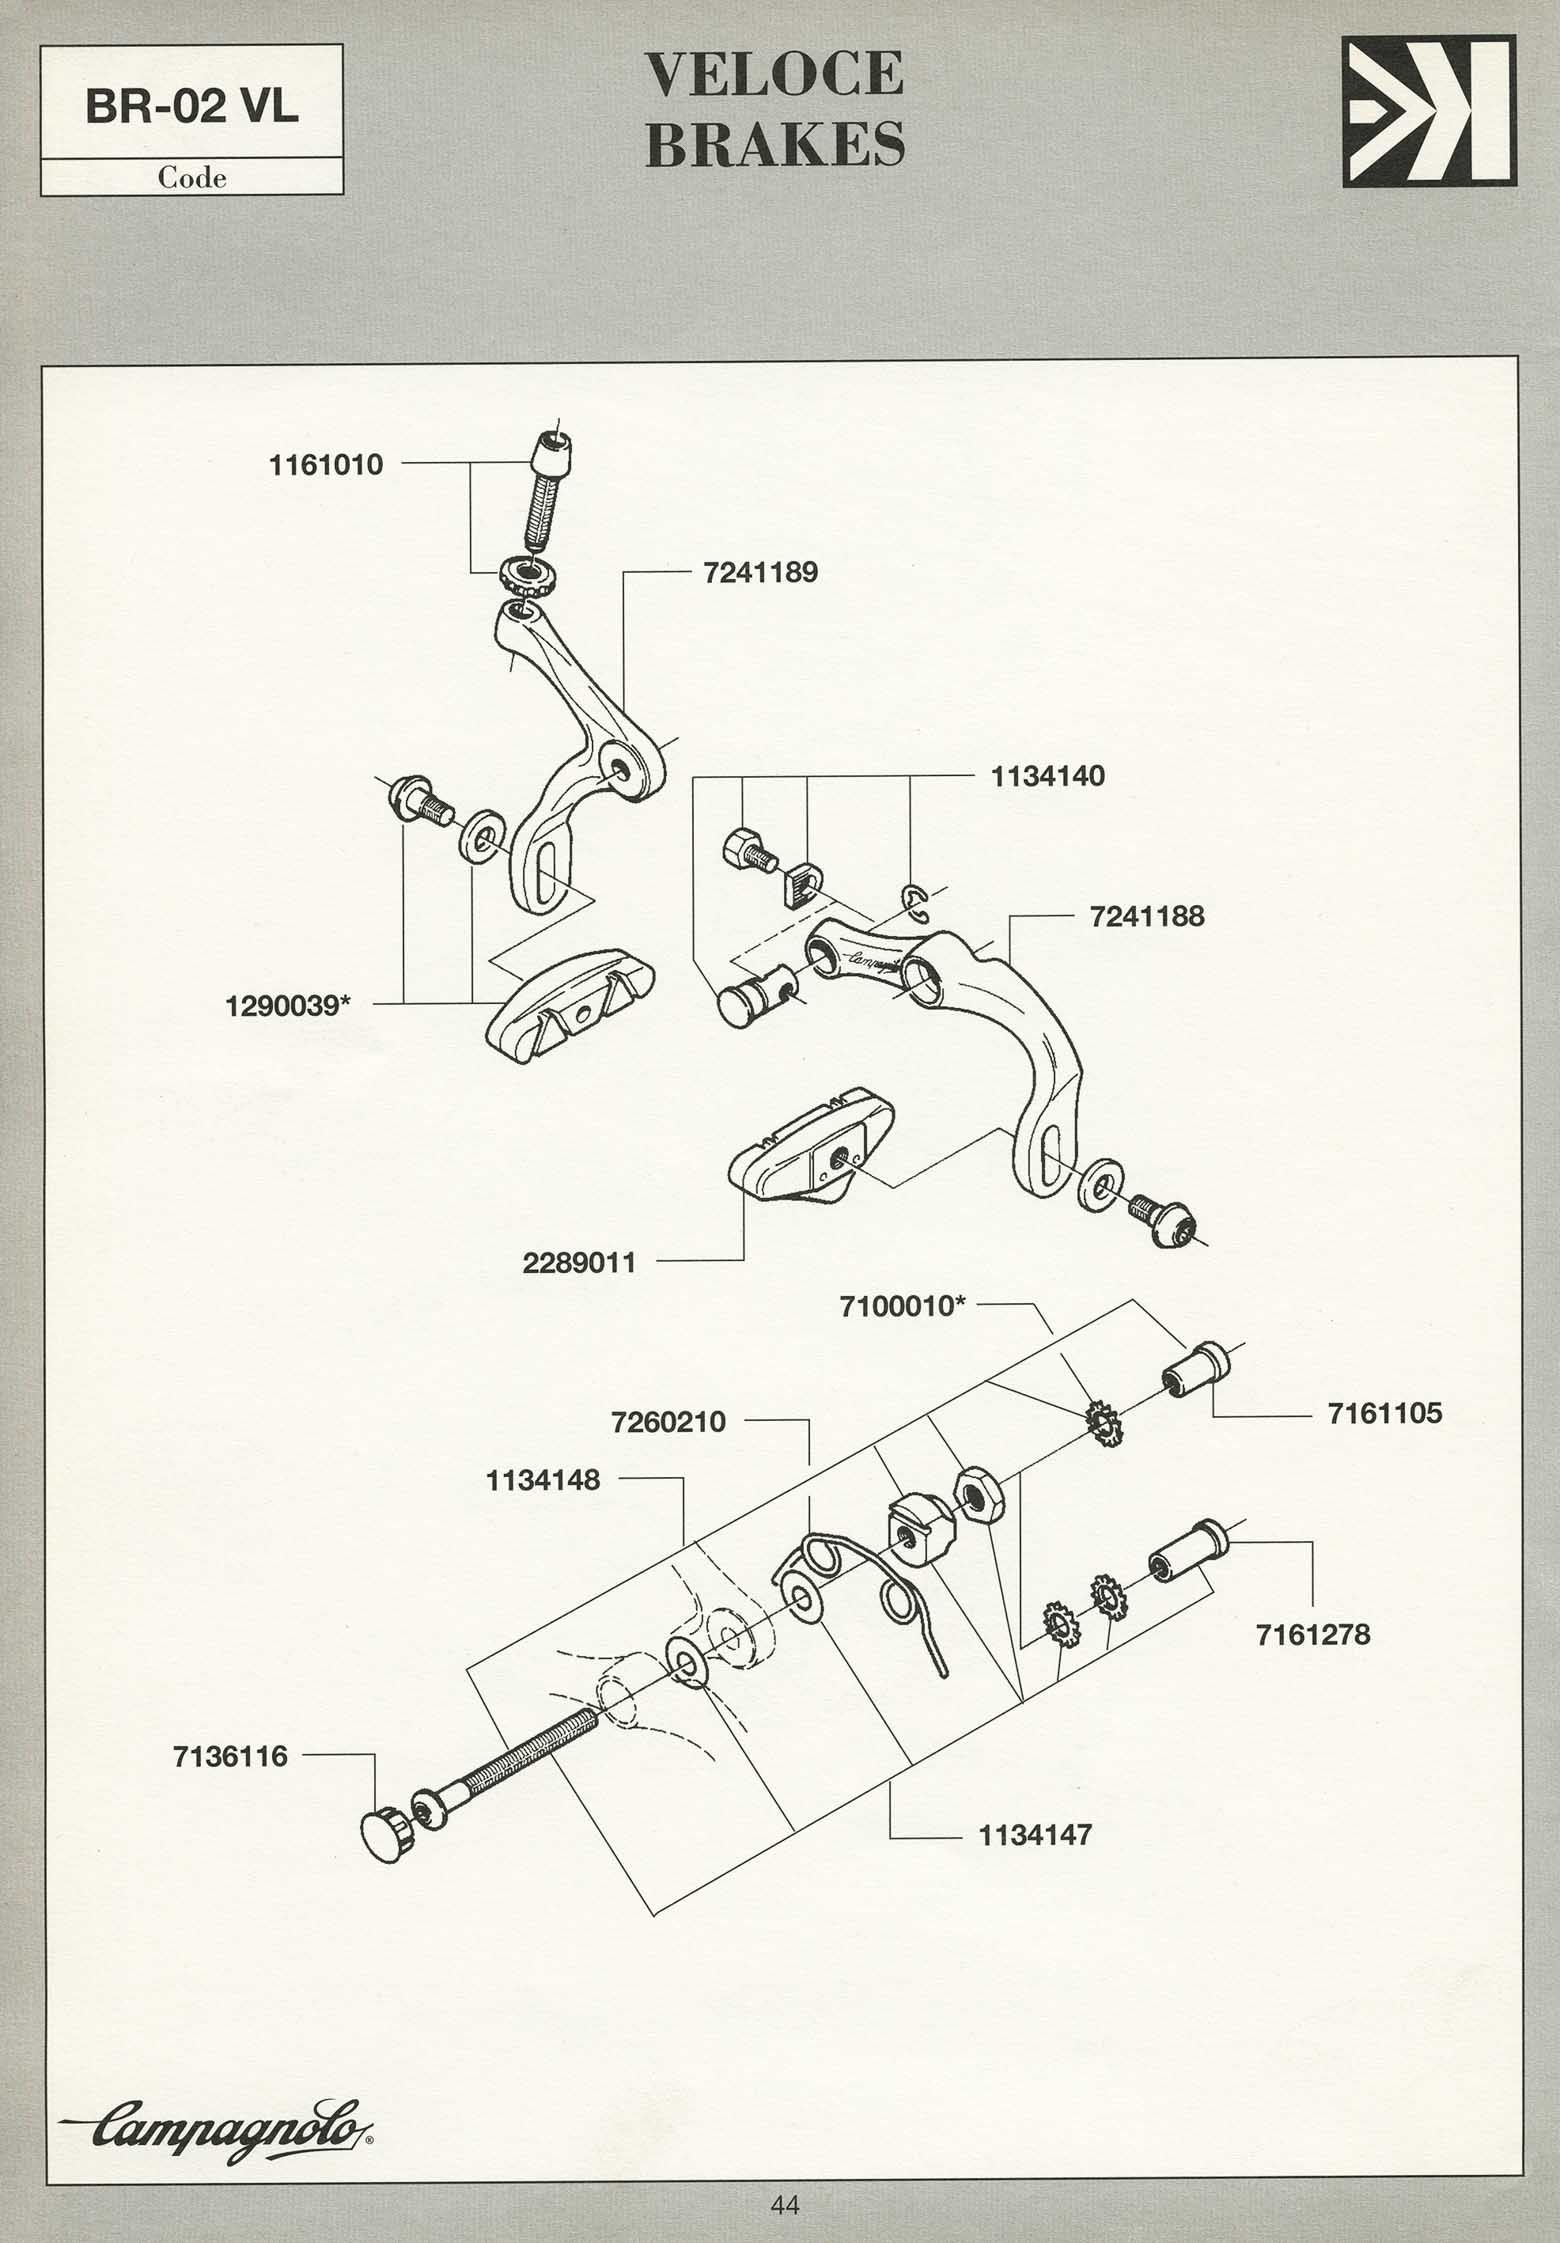 Campagnolo Spare Parts Catalogue - 1993 Product Range page 044 main image